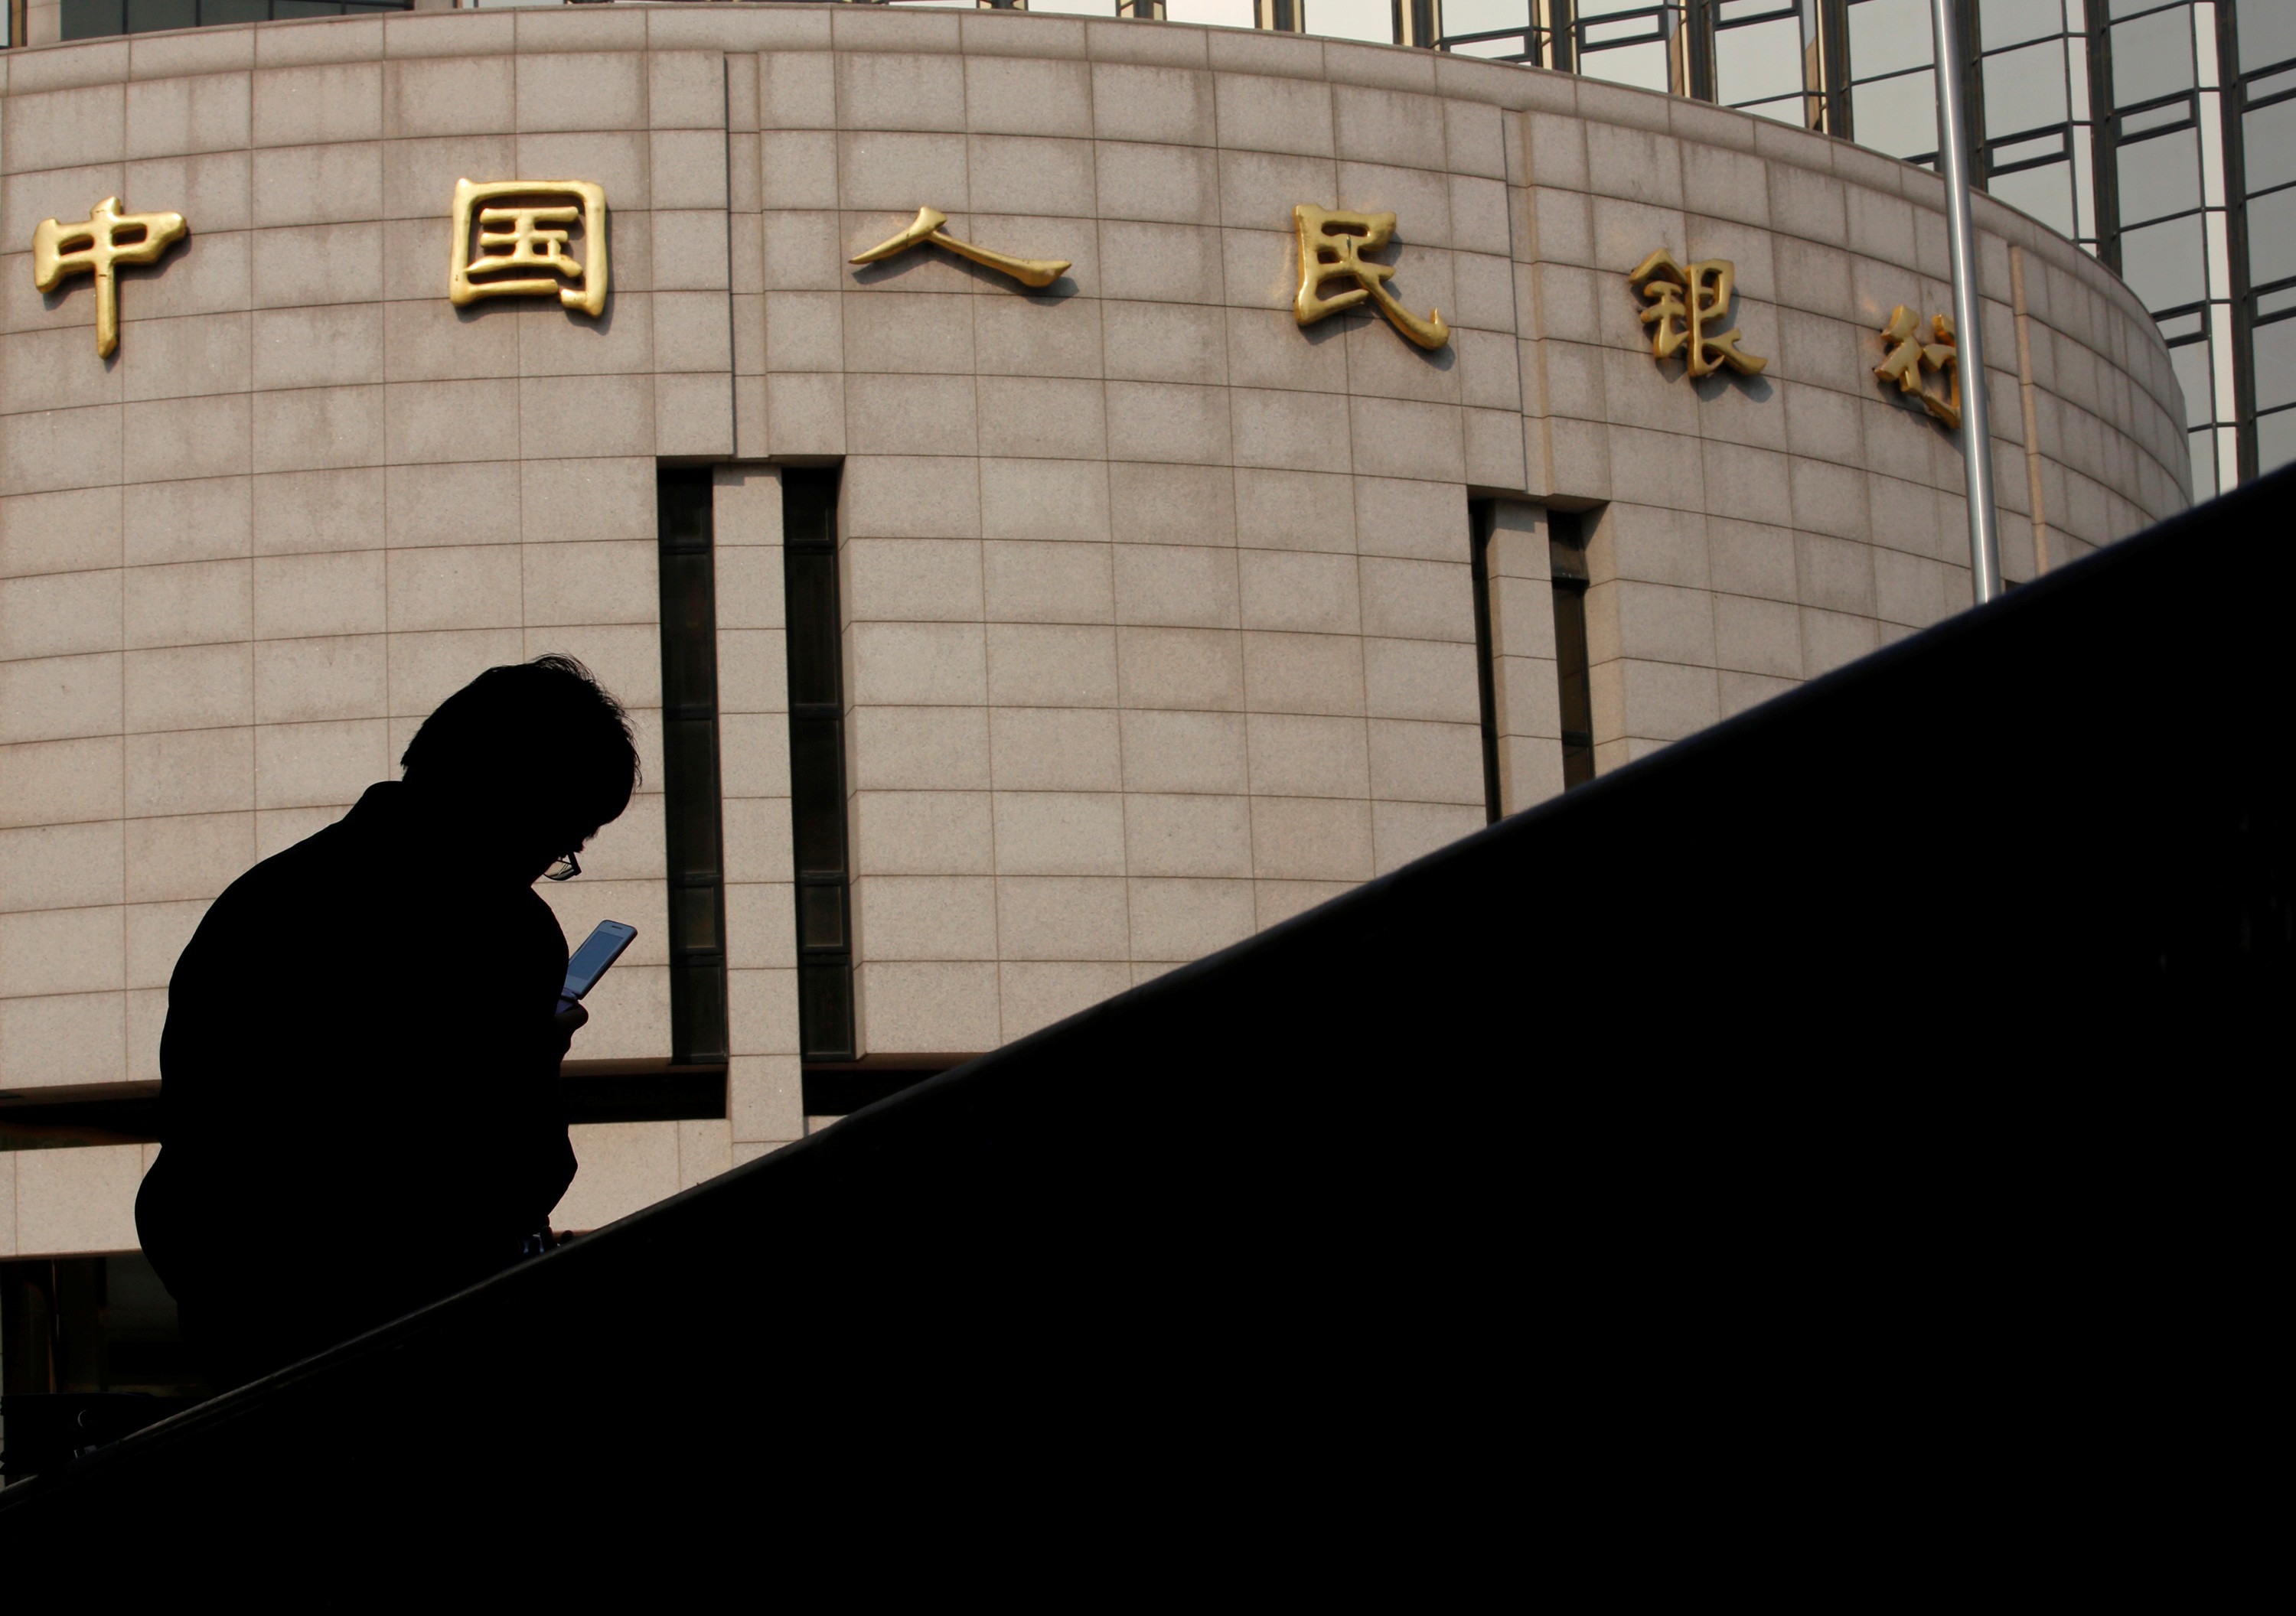 If need be, the People’s Bank of China can do more to shore up China’s economy. Interest rates are still relatively high so there is room for cuts. Photo: Reuters